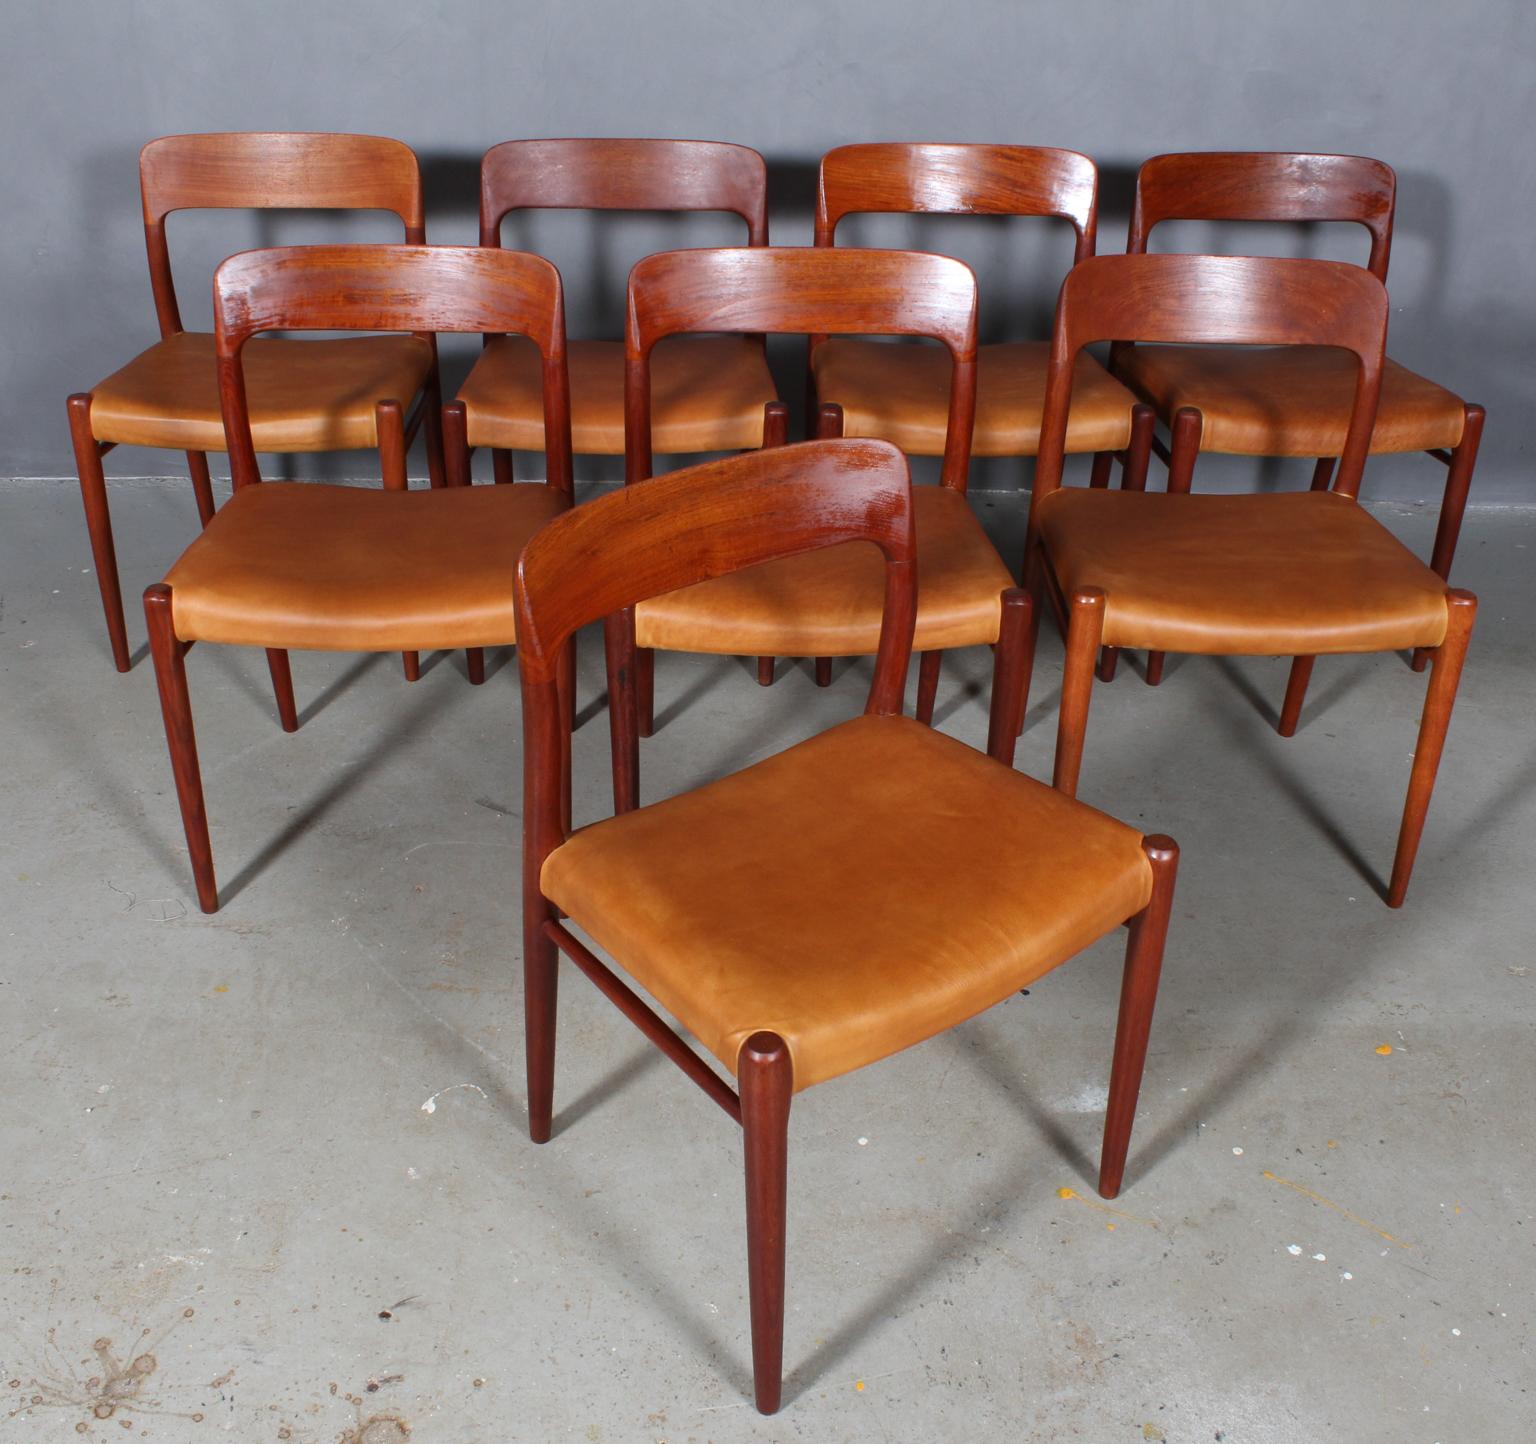 Set of eight N. O. Møller dining chairs with frame of solid teak.

Seats new upholstered with tan aniline leather

Model 75, made by J. L. Møller, Denmark, 1960s.